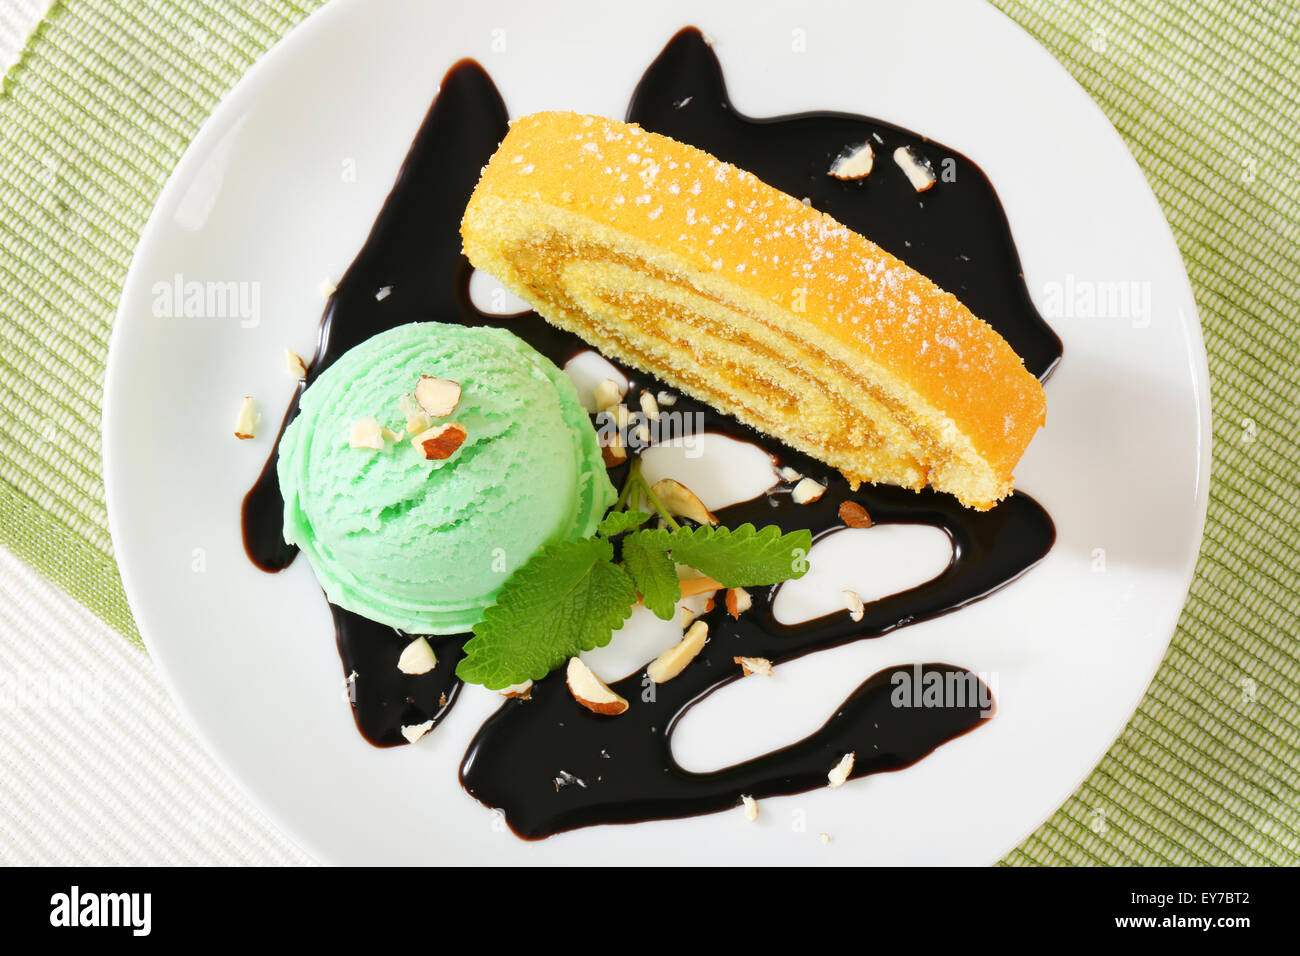 Slice of Swiss roll cake with green sherbet and chocolate sauce Stock Photo